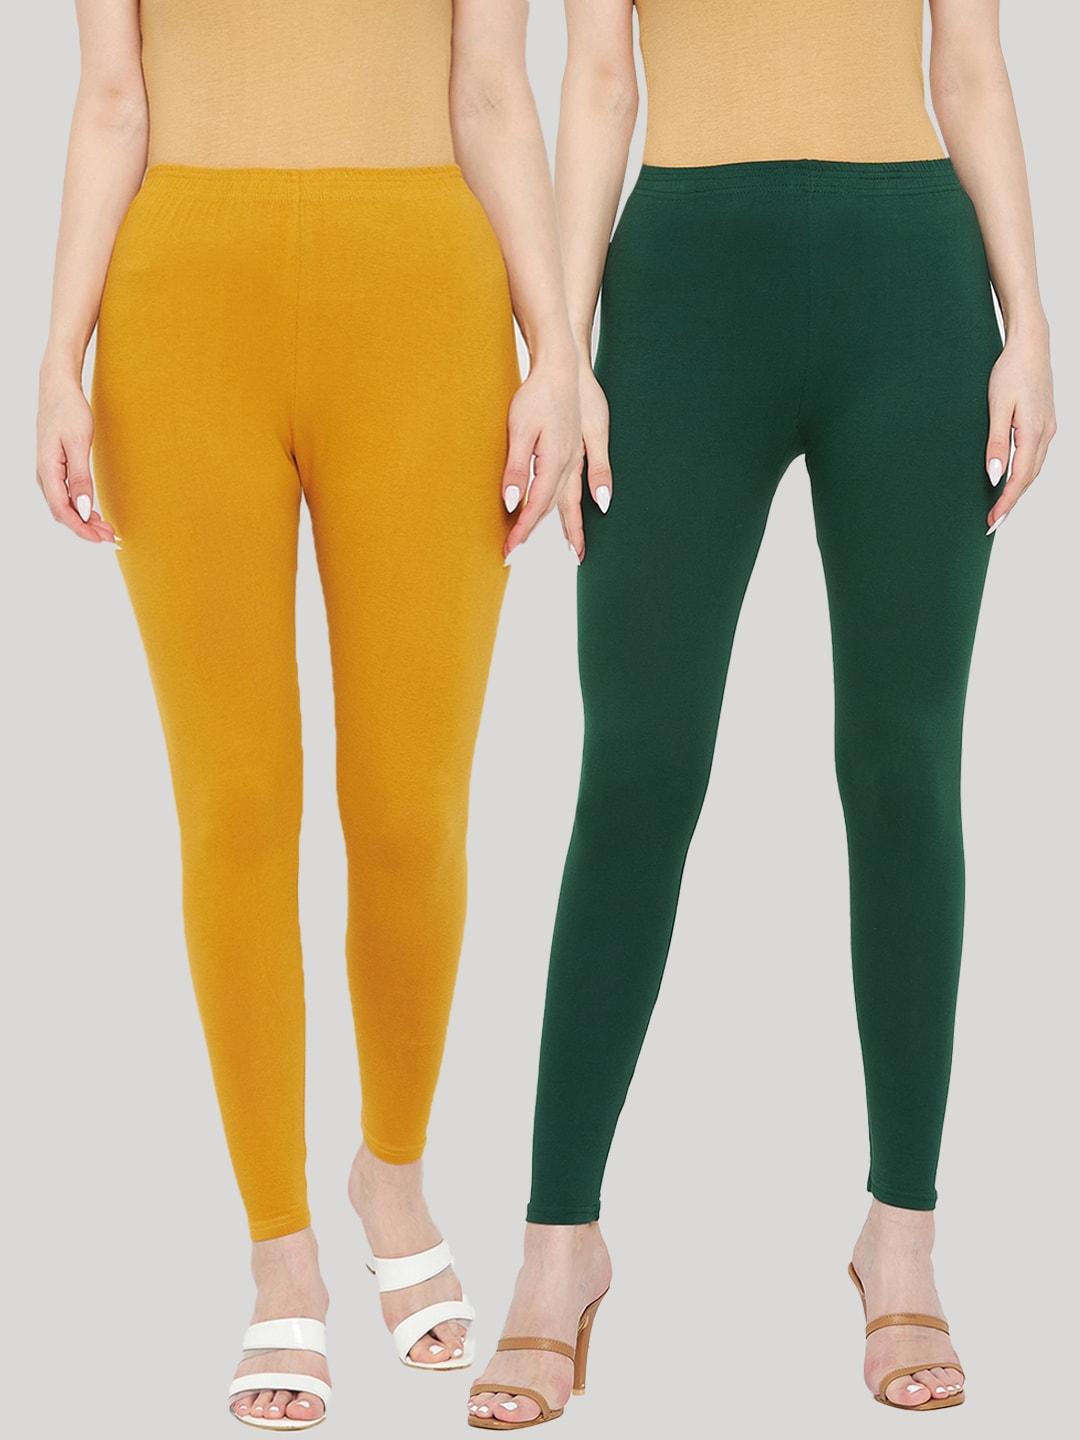 clora creation women pack of 2 bottle green & mustard solid ankle length cotton leggings